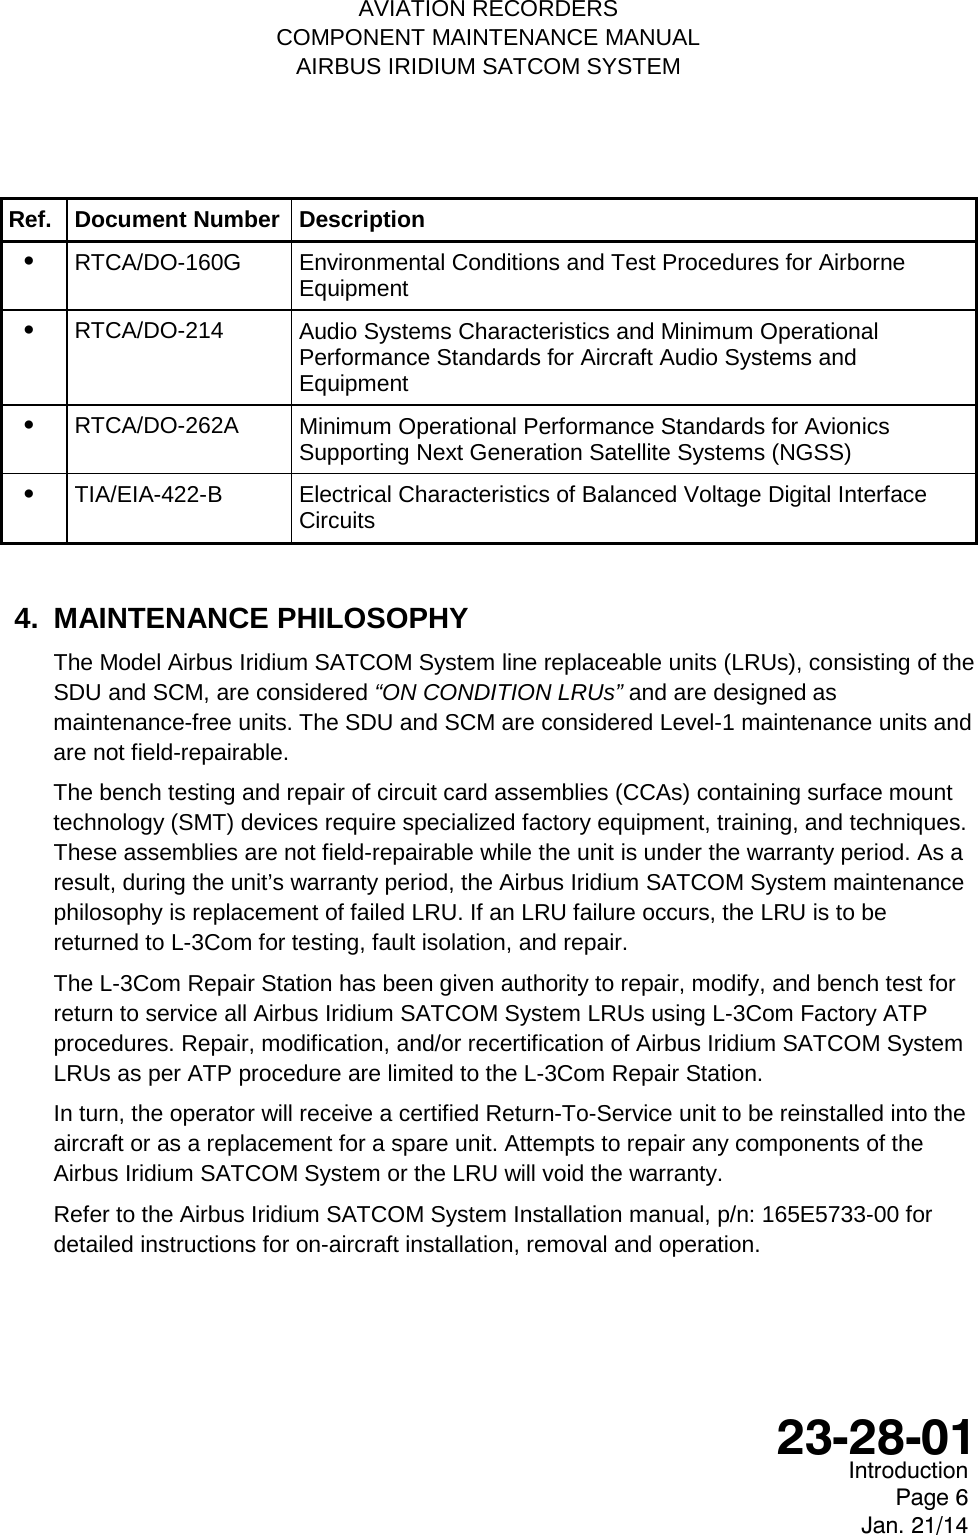   AVIATION RECORDERS COMPONENT MAINTENANCE MANUAL AIRBUS IRIDIUM SATCOM SYSTEM Ref. Document Number Description •   RTCA/DO-160G Environmental Conditions and Test Procedures for Airborne Equipment •   RTCA/DO-214 Audio Systems Characteristics and Minimum Operational Performance Standards for Aircraft Audio Systems and Equipment •   RTCA/DO-262A Minimum Operational Performance Standards for Avionics Supporting Next Generation Satellite Systems (NGSS) •   TIA/EIA-422-B  Electrical Characteristics of Balanced Voltage Digital Interface Circuits  4. MAINTENANCE PHILOSOPHY The Model Airbus Iridium SATCOM System line replaceable units (LRUs), consisting of the SDU and SCM, are considered “ON CONDITION LRUs” and are designed as maintenance-free units. The SDU and SCM are considered Level-1 maintenance units and are not field-repairable. The bench testing and repair of circuit card assemblies (CCAs) containing surface mount technology (SMT) devices require specialized factory equipment, training, and techniques.  These assemblies are not field-repairable while the unit is under the warranty period. As a result, during the unit’s warranty period, the Airbus Iridium SATCOM System maintenance philosophy is replacement of failed LRU. If an LRU failure occurs, the LRU is to be returned to L-3Com for testing, fault isolation, and repair. The L-3Com Repair Station has been given authority to repair, modify, and bench test for return to service all Airbus Iridium SATCOM System LRUs using L-3Com Factory ATP procedures. Repair, modification, and/or recertification of Airbus Iridium SATCOM System LRUs as per ATP procedure are limited to the L-3Com Repair Station. In turn, the operator will receive a certified Return-To-Service unit to be reinstalled into the aircraft or as a replacement for a spare unit. Attempts to repair any components of the Airbus Iridium SATCOM System or the LRU will void the warranty. Refer to the Airbus Iridium SATCOM System Installation manual, p/n: 165E5733-00 for detailed instructions for on-aircraft installation, removal and operation.    Introduction Page 6 Jan. 21/14  23-28-01 